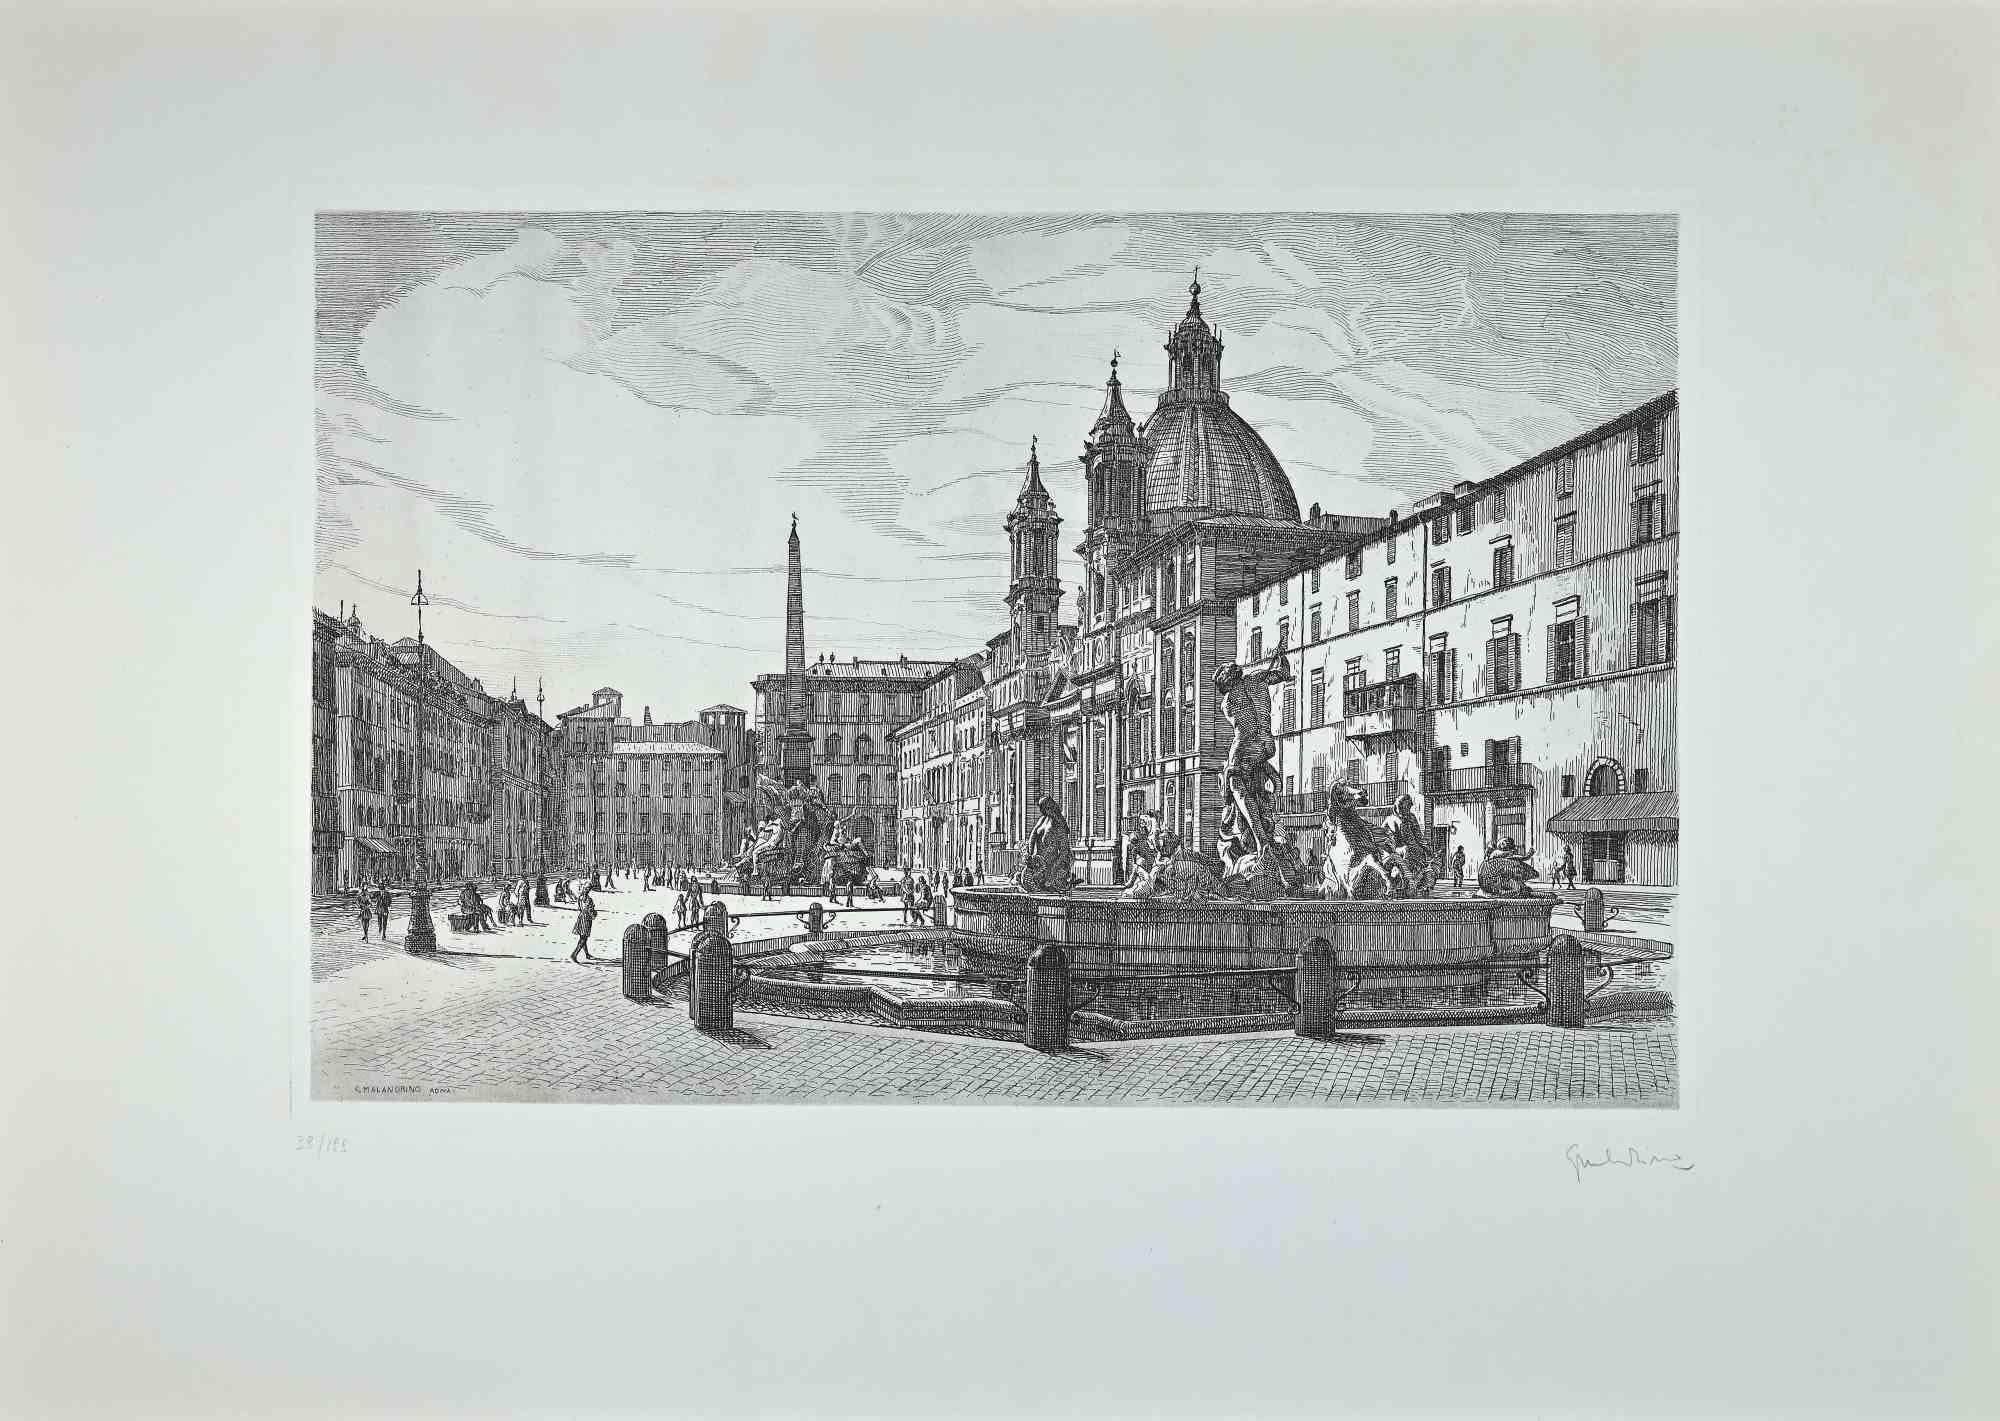 View of Piazza Navona - Etching by Giuseppe Malandrino - 1970